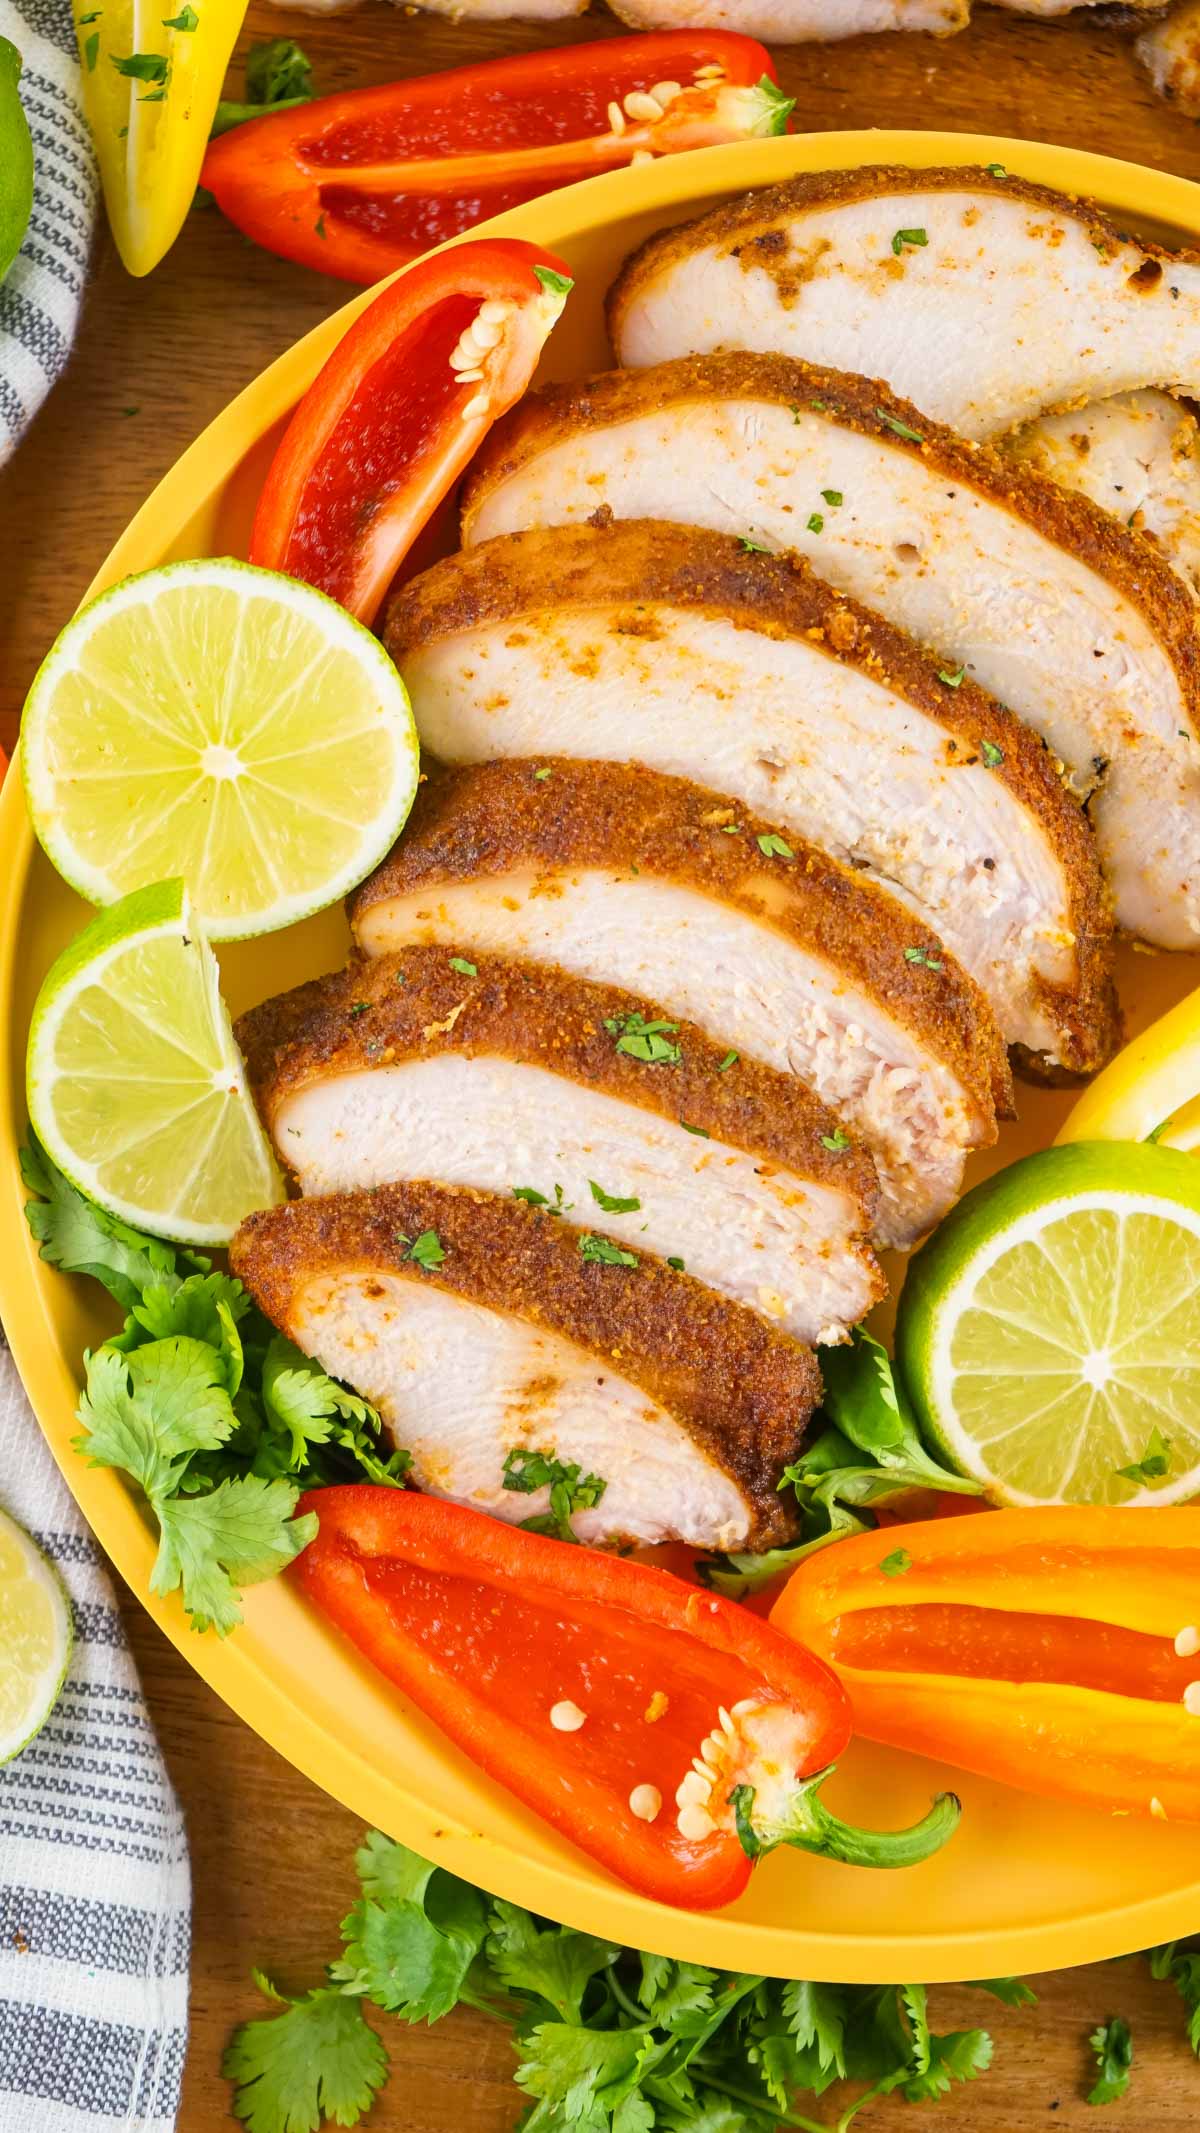 Turkey breast that has been sliced on a chopping board with lemon.